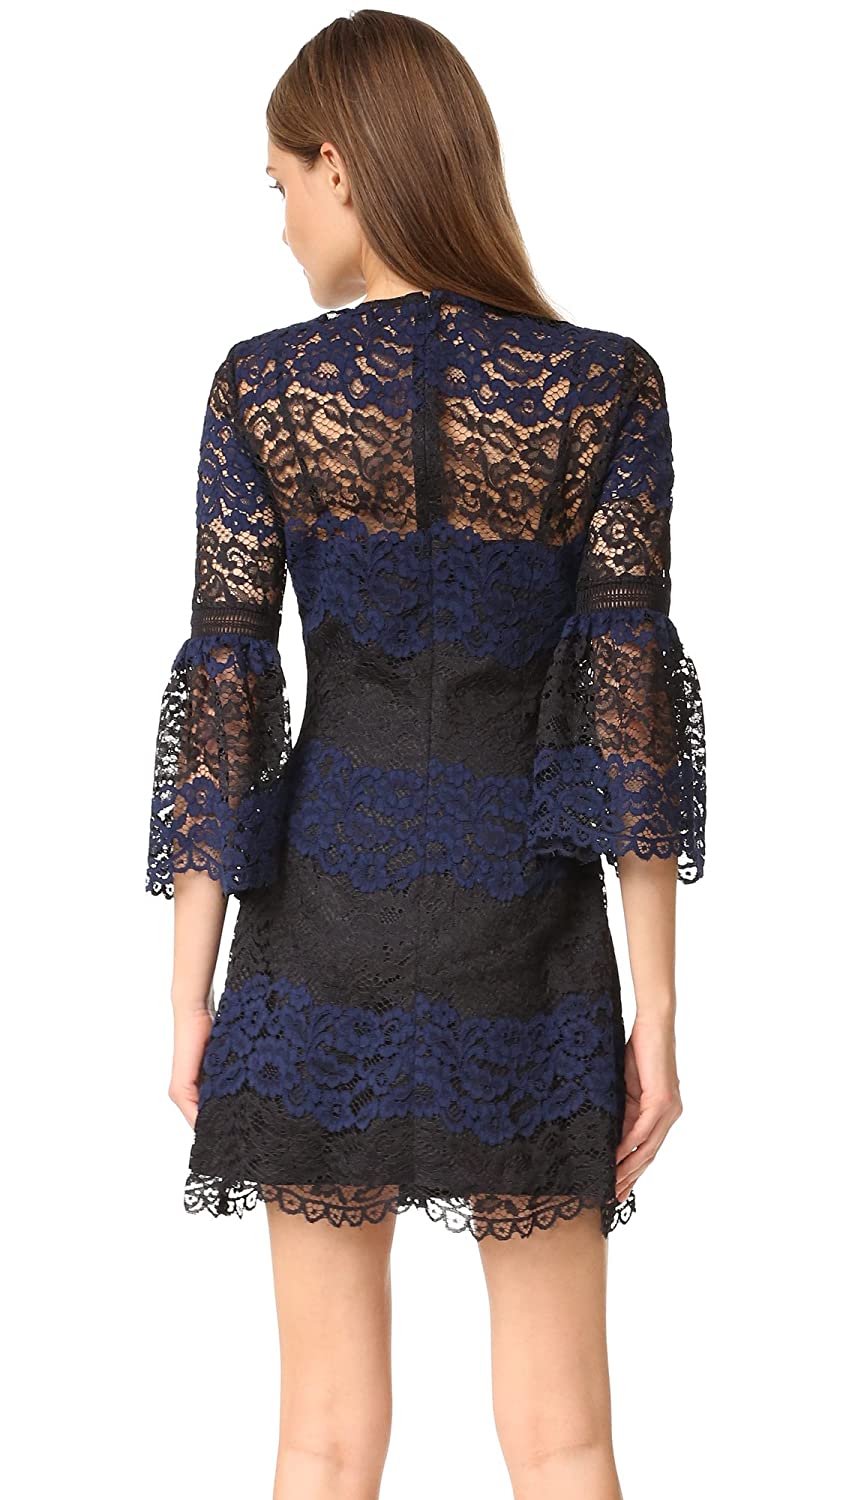 Cynthia Rowley Women's Lace Dress with Bell Sleeves Size 10